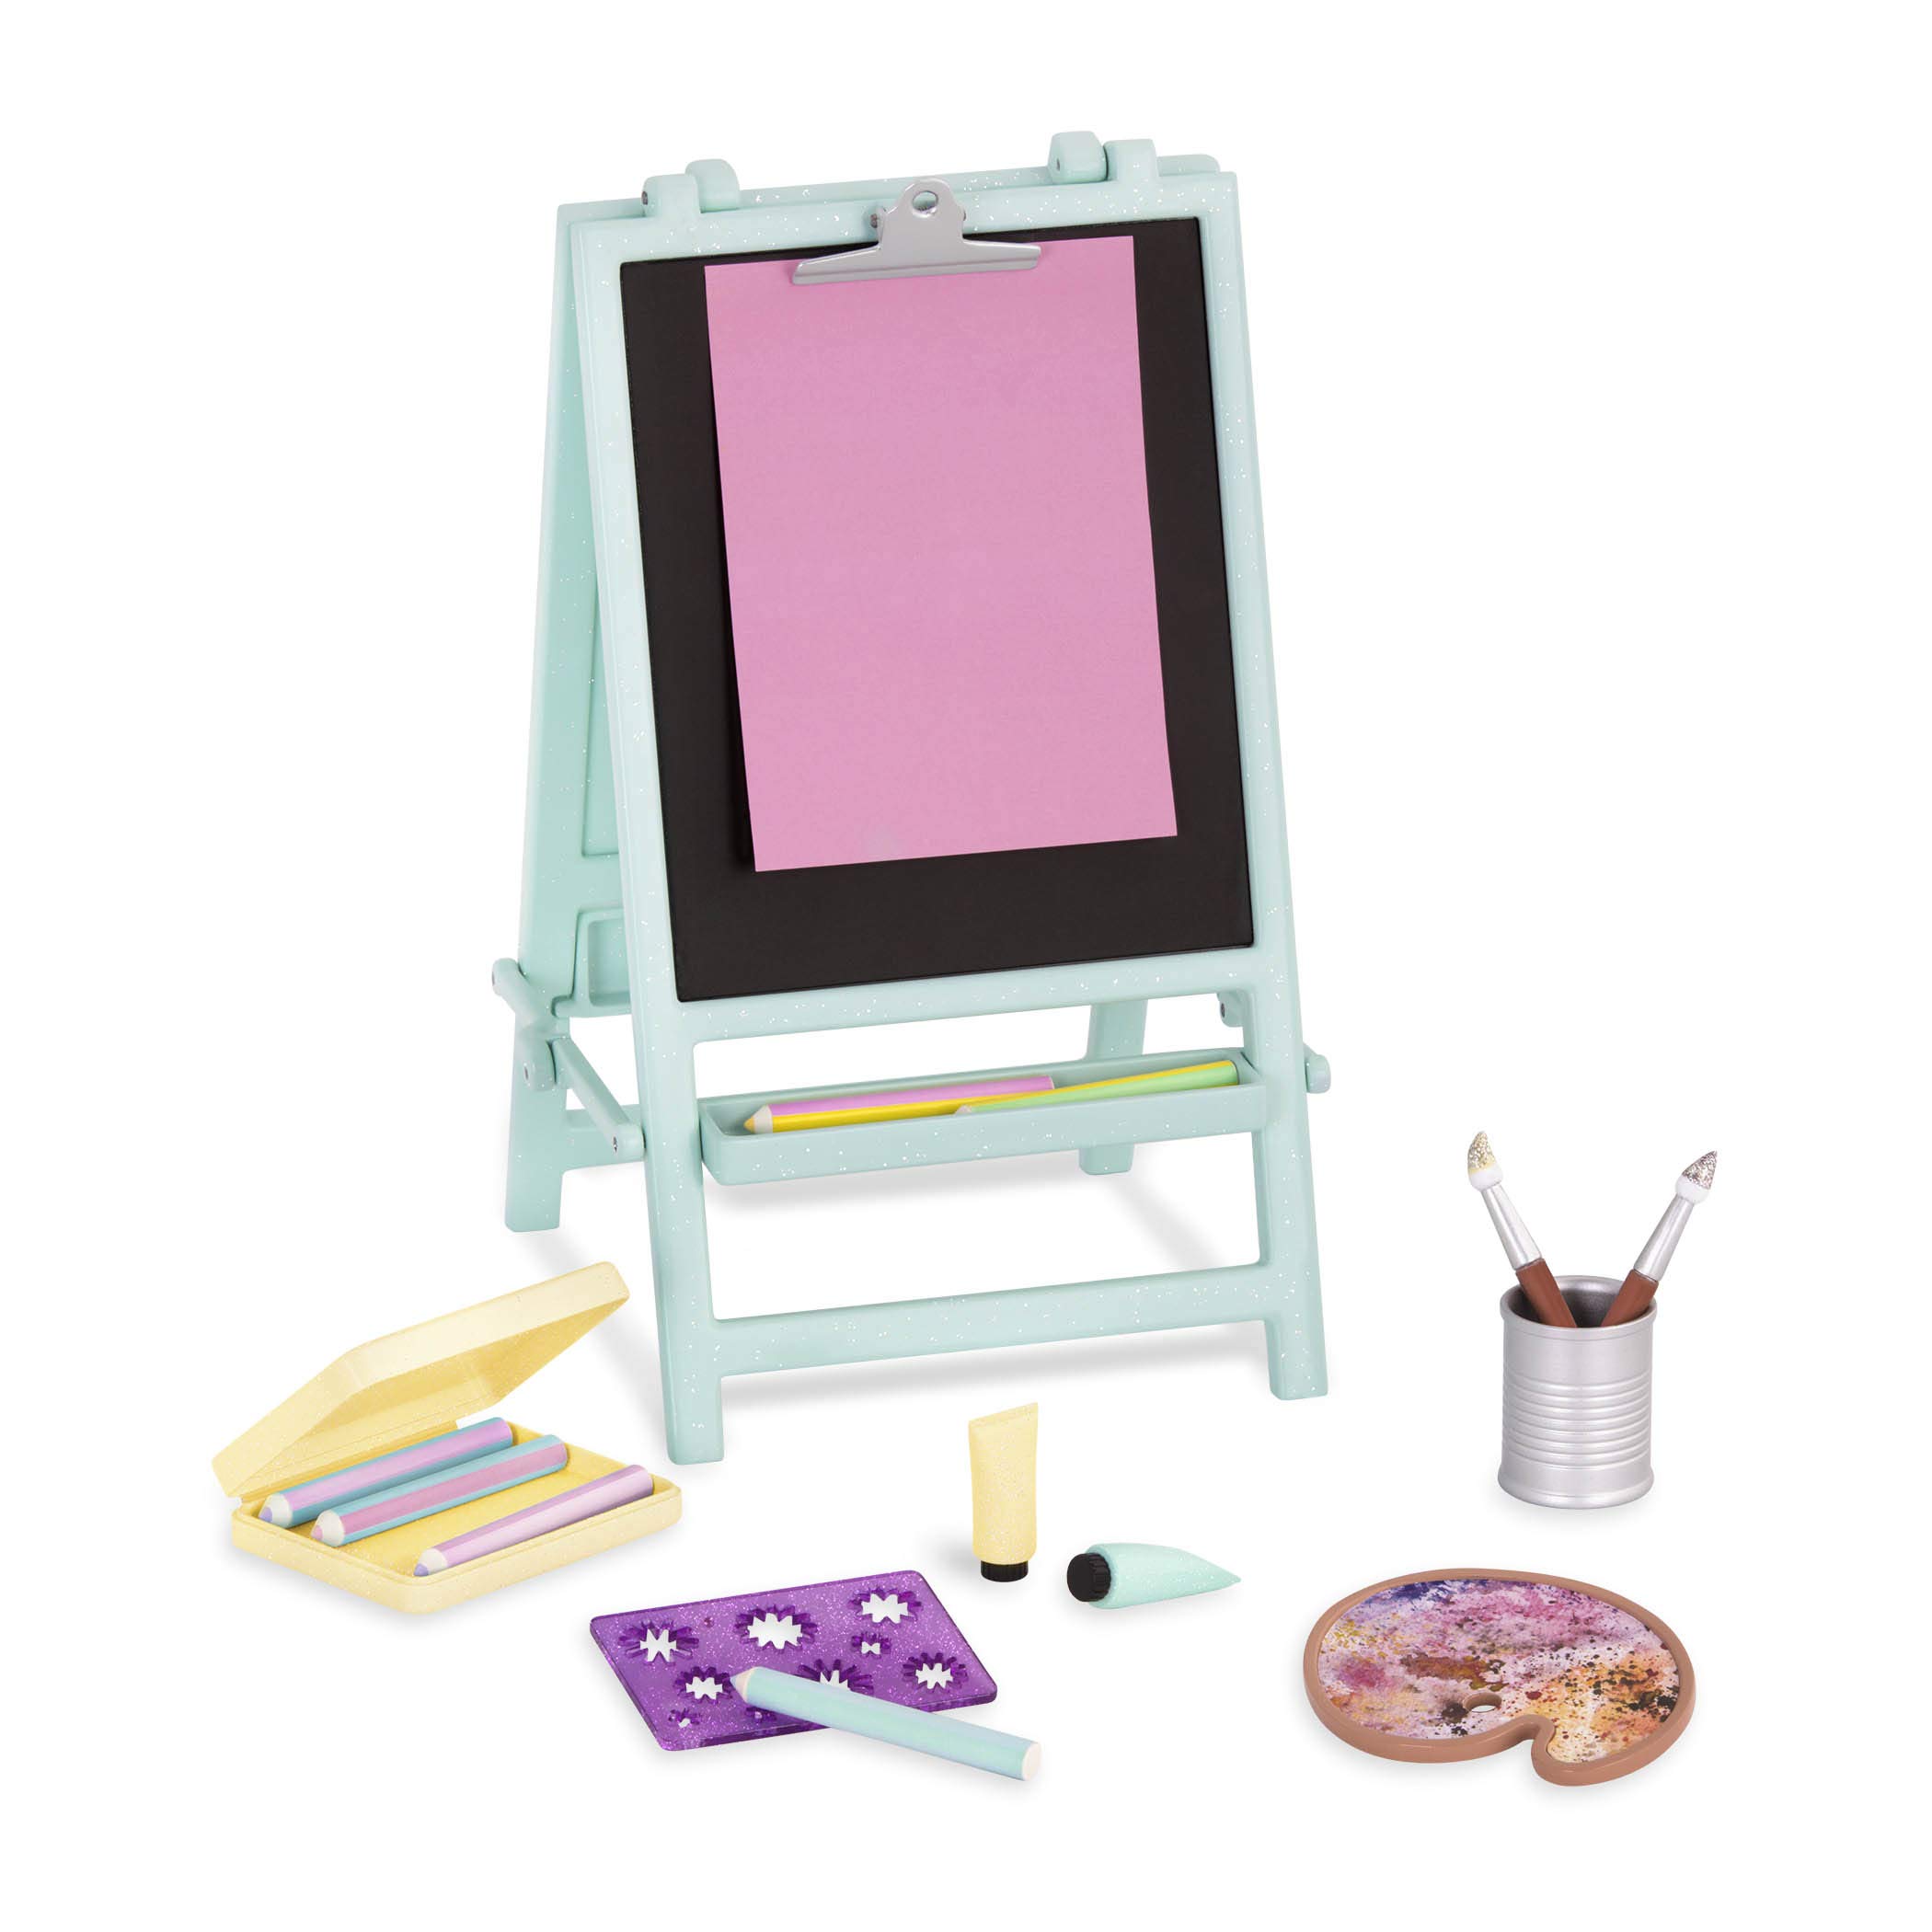 Glitter Girls by Battat – Creative Art Kit Chalkboard Easel Accessory Set – 14-inch Doll Clothes and Accessories for Girls Age 3 and Up – Children’s Toys, 14 inches , Black